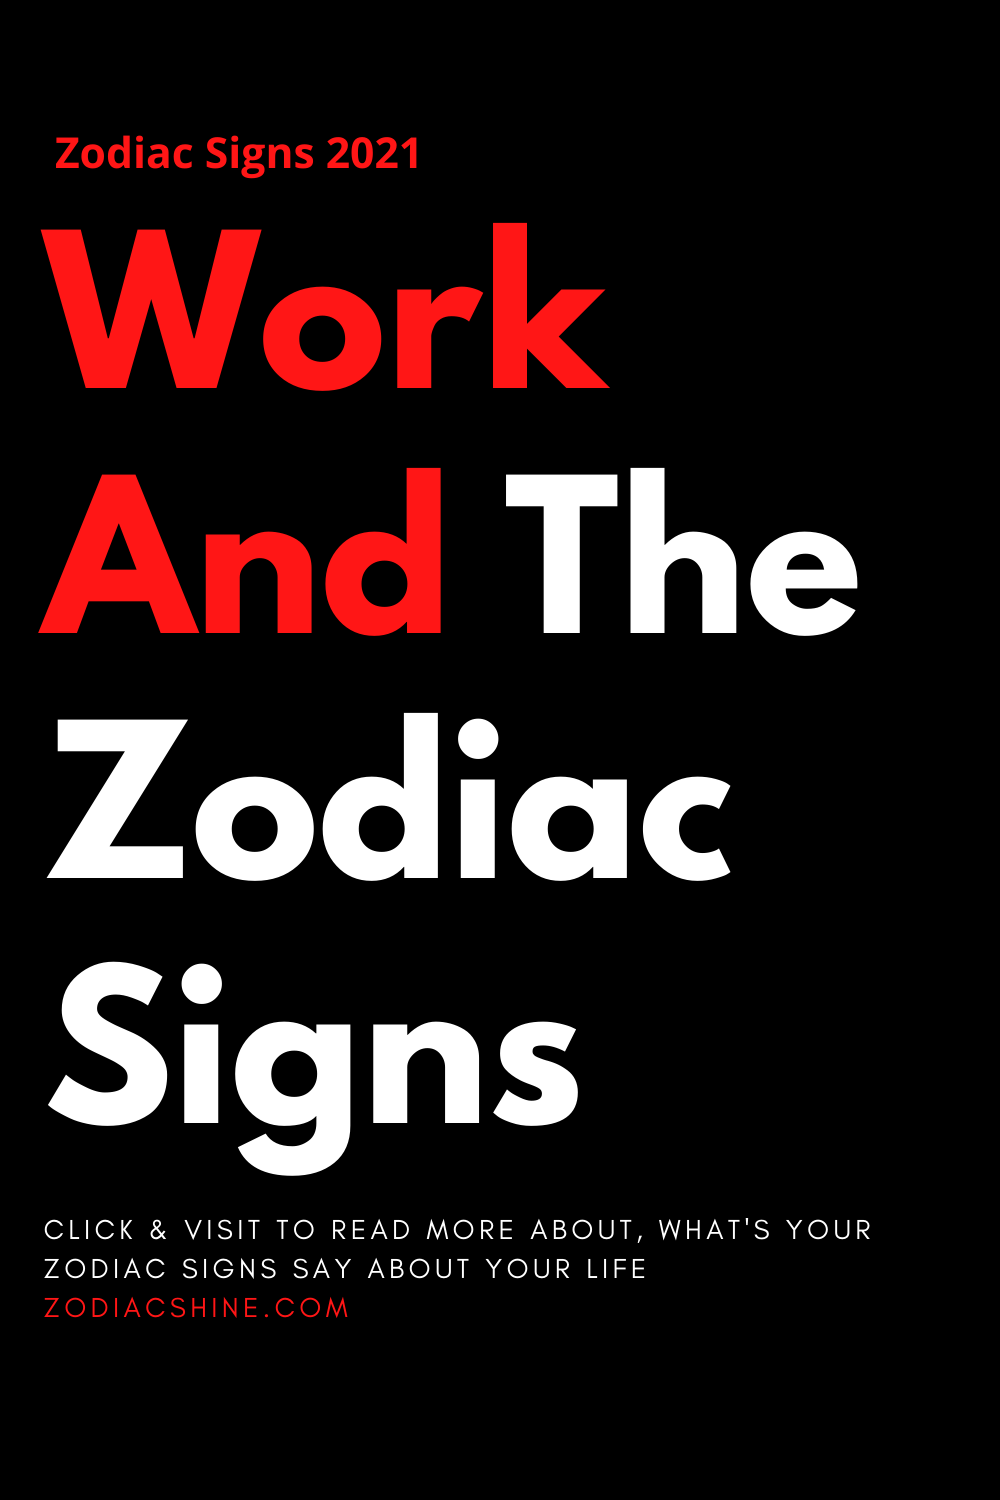 Work And The Zodiac Signs